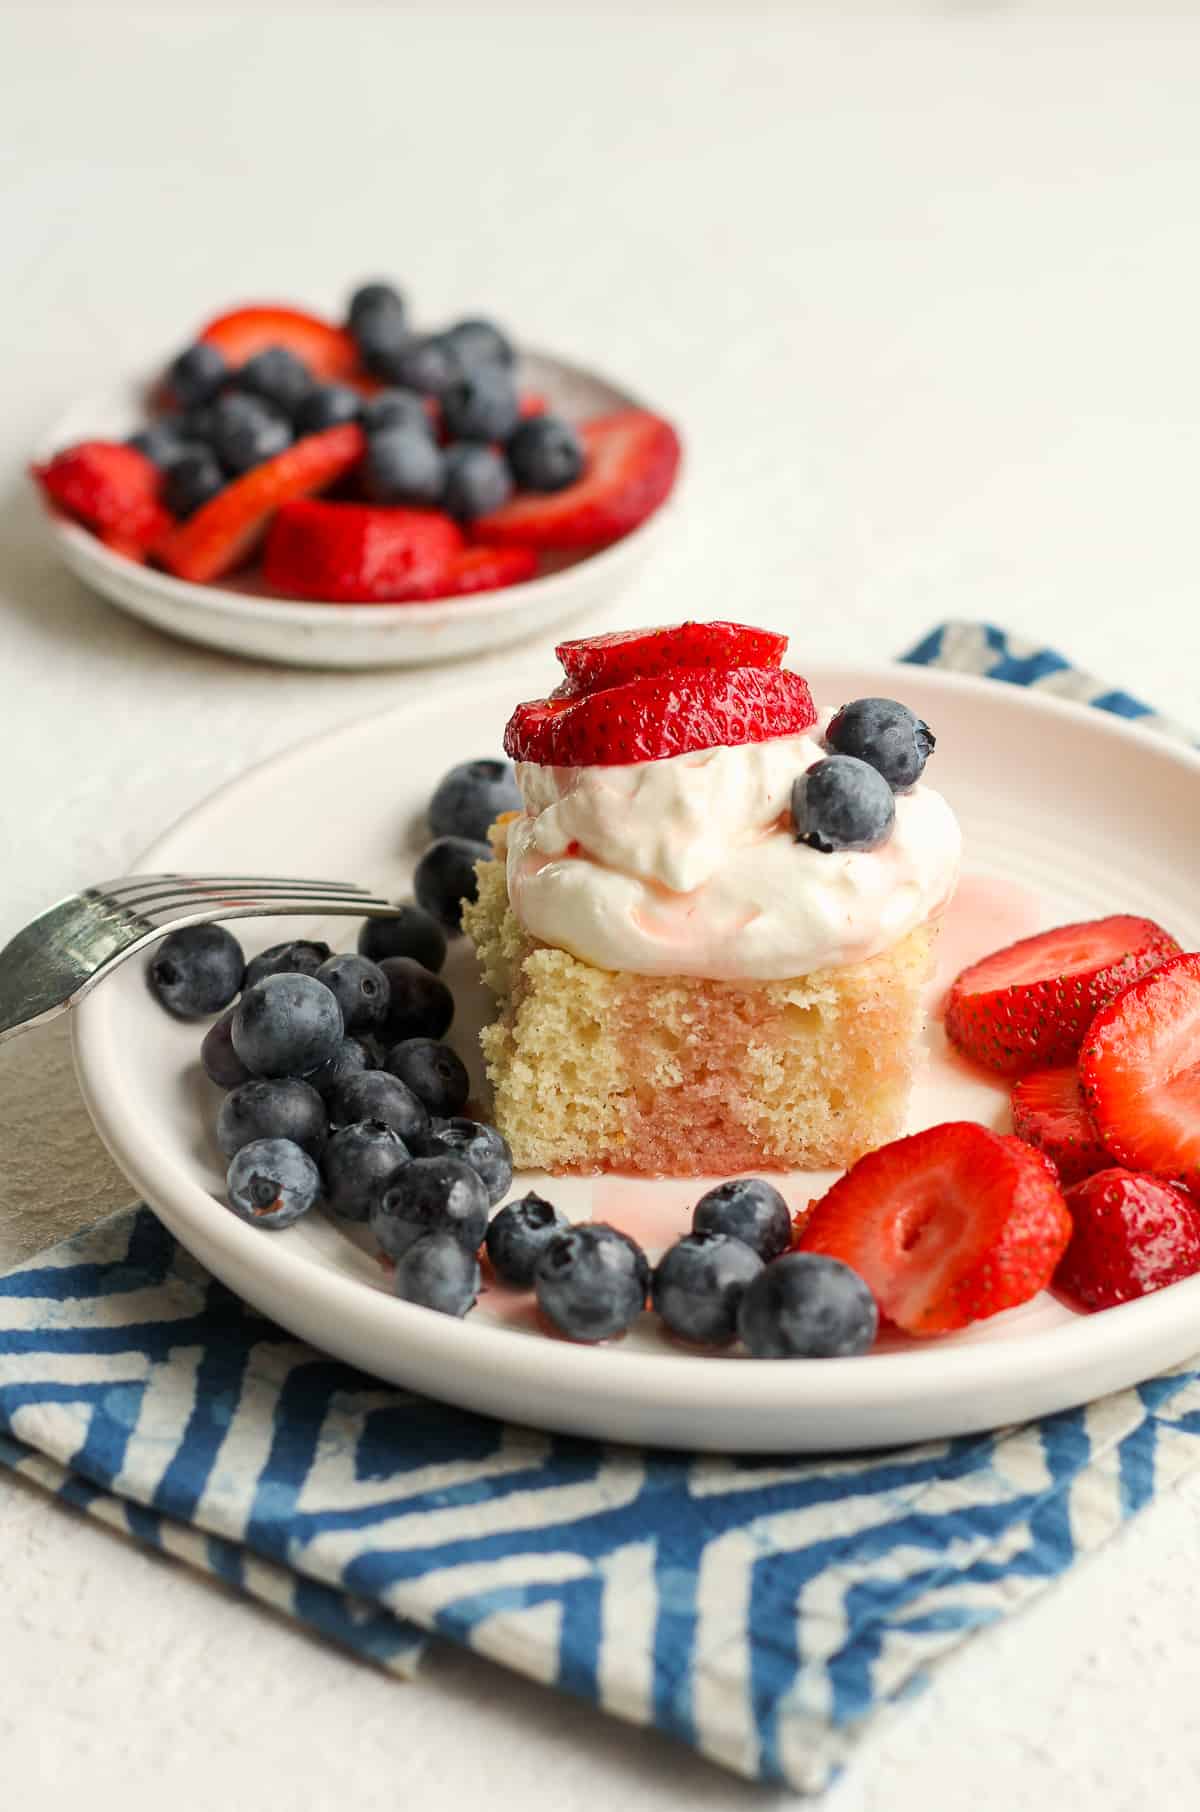 Side view of a piece of shortcake with blueberries and strawberries.